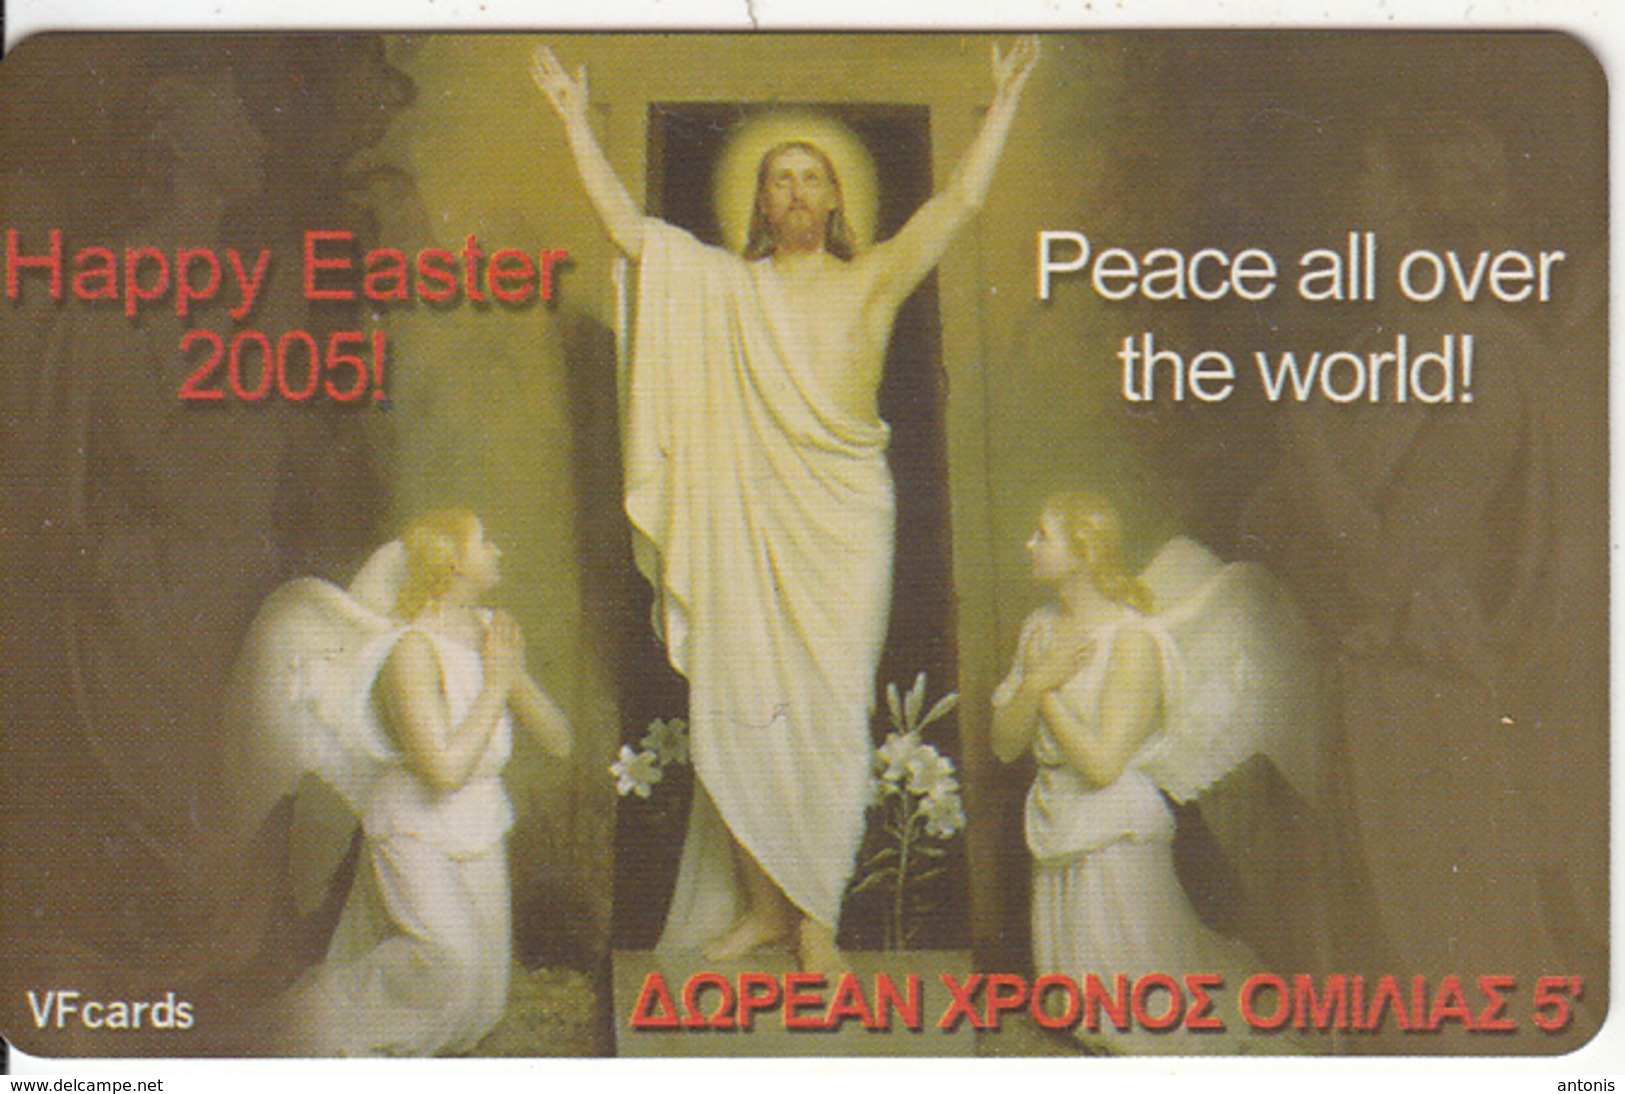 GREECE - Happy Easter 2005, VF By Amimex Promotion Prepaid Card, Tirage 200, 04/05, Used - Grecia